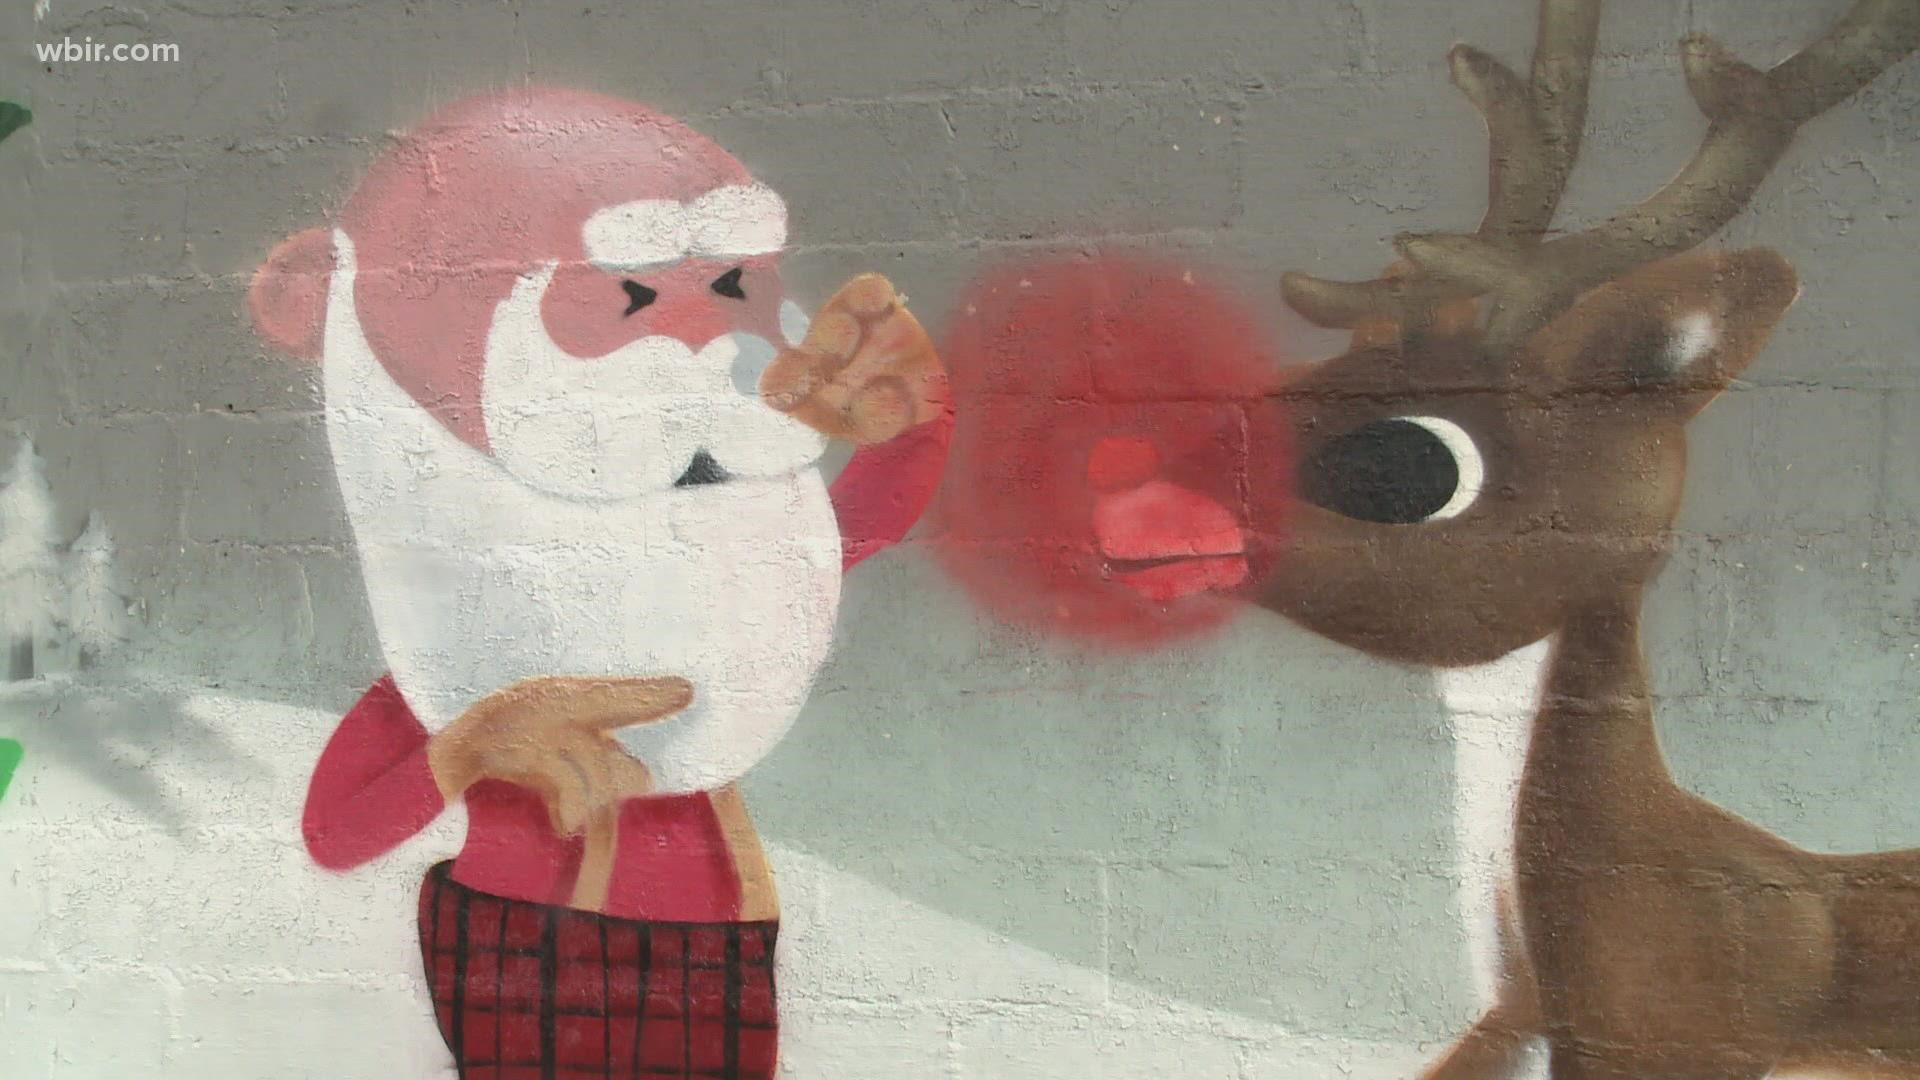 Instead of graffiti covering buildings on Atlantic Avenue, an artist is painting scenes from Rudolph the Red-Nosed Reindeer on them instead.